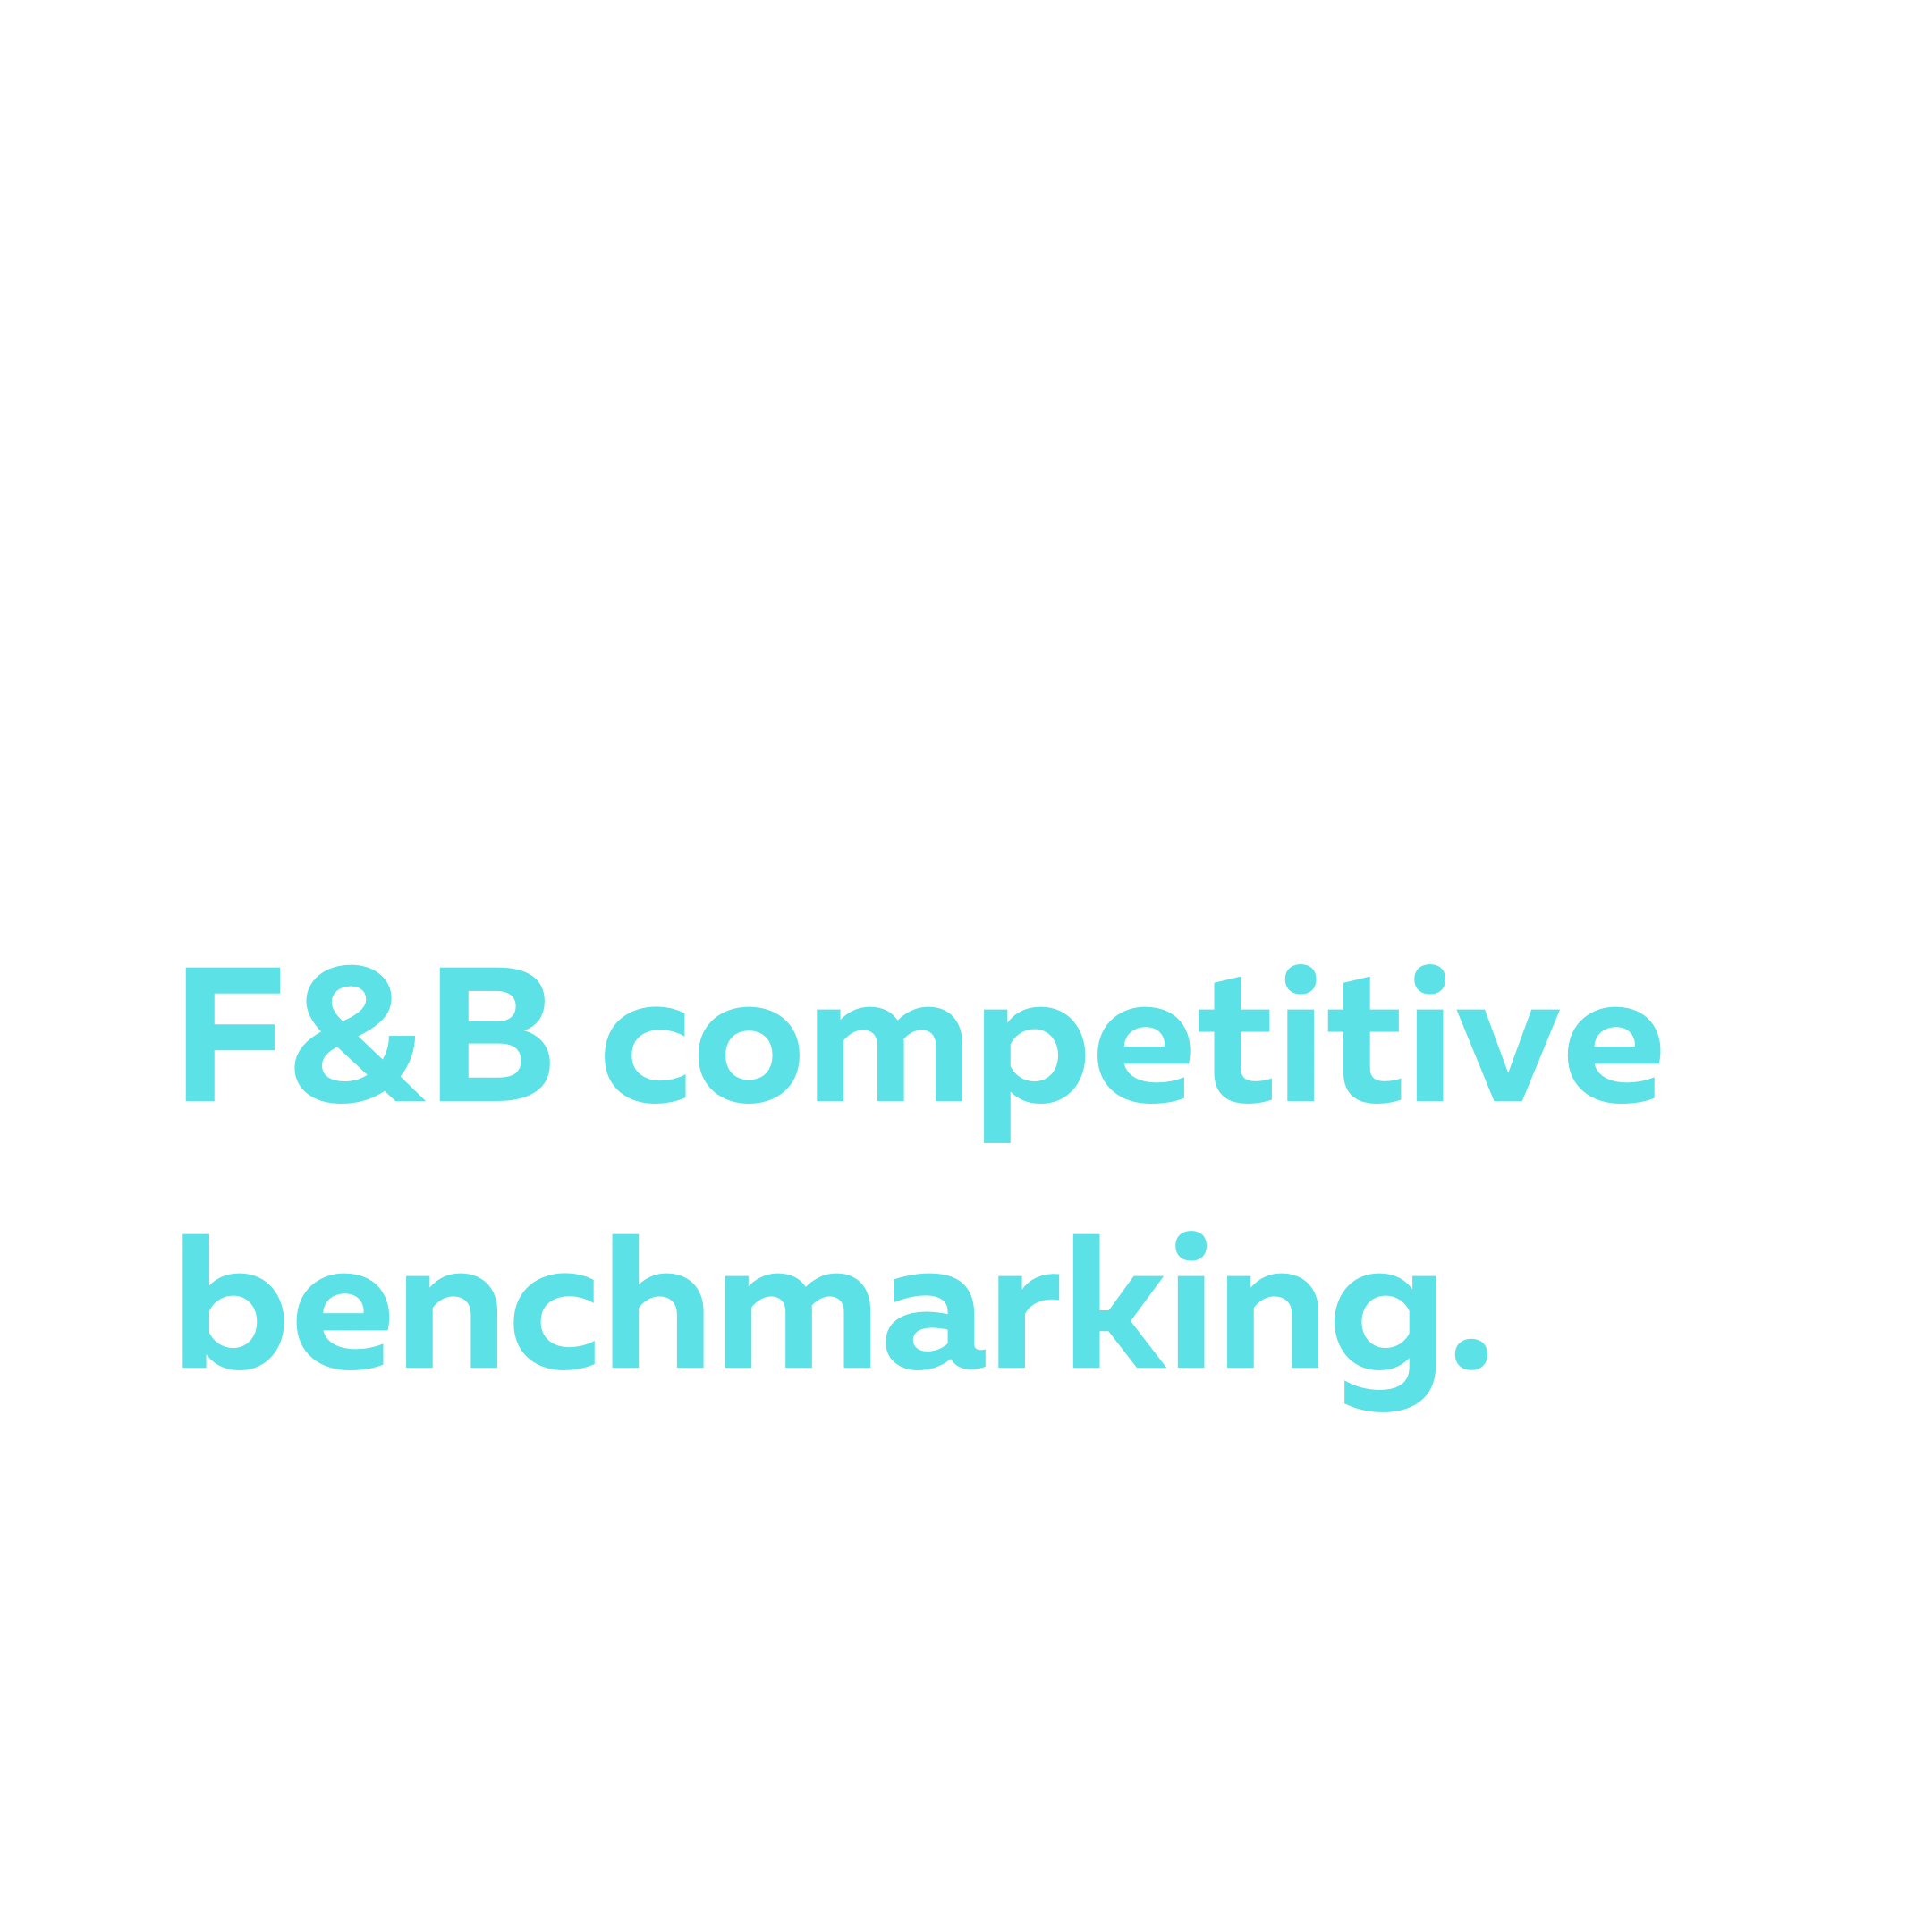 F&B competitive benchmarking